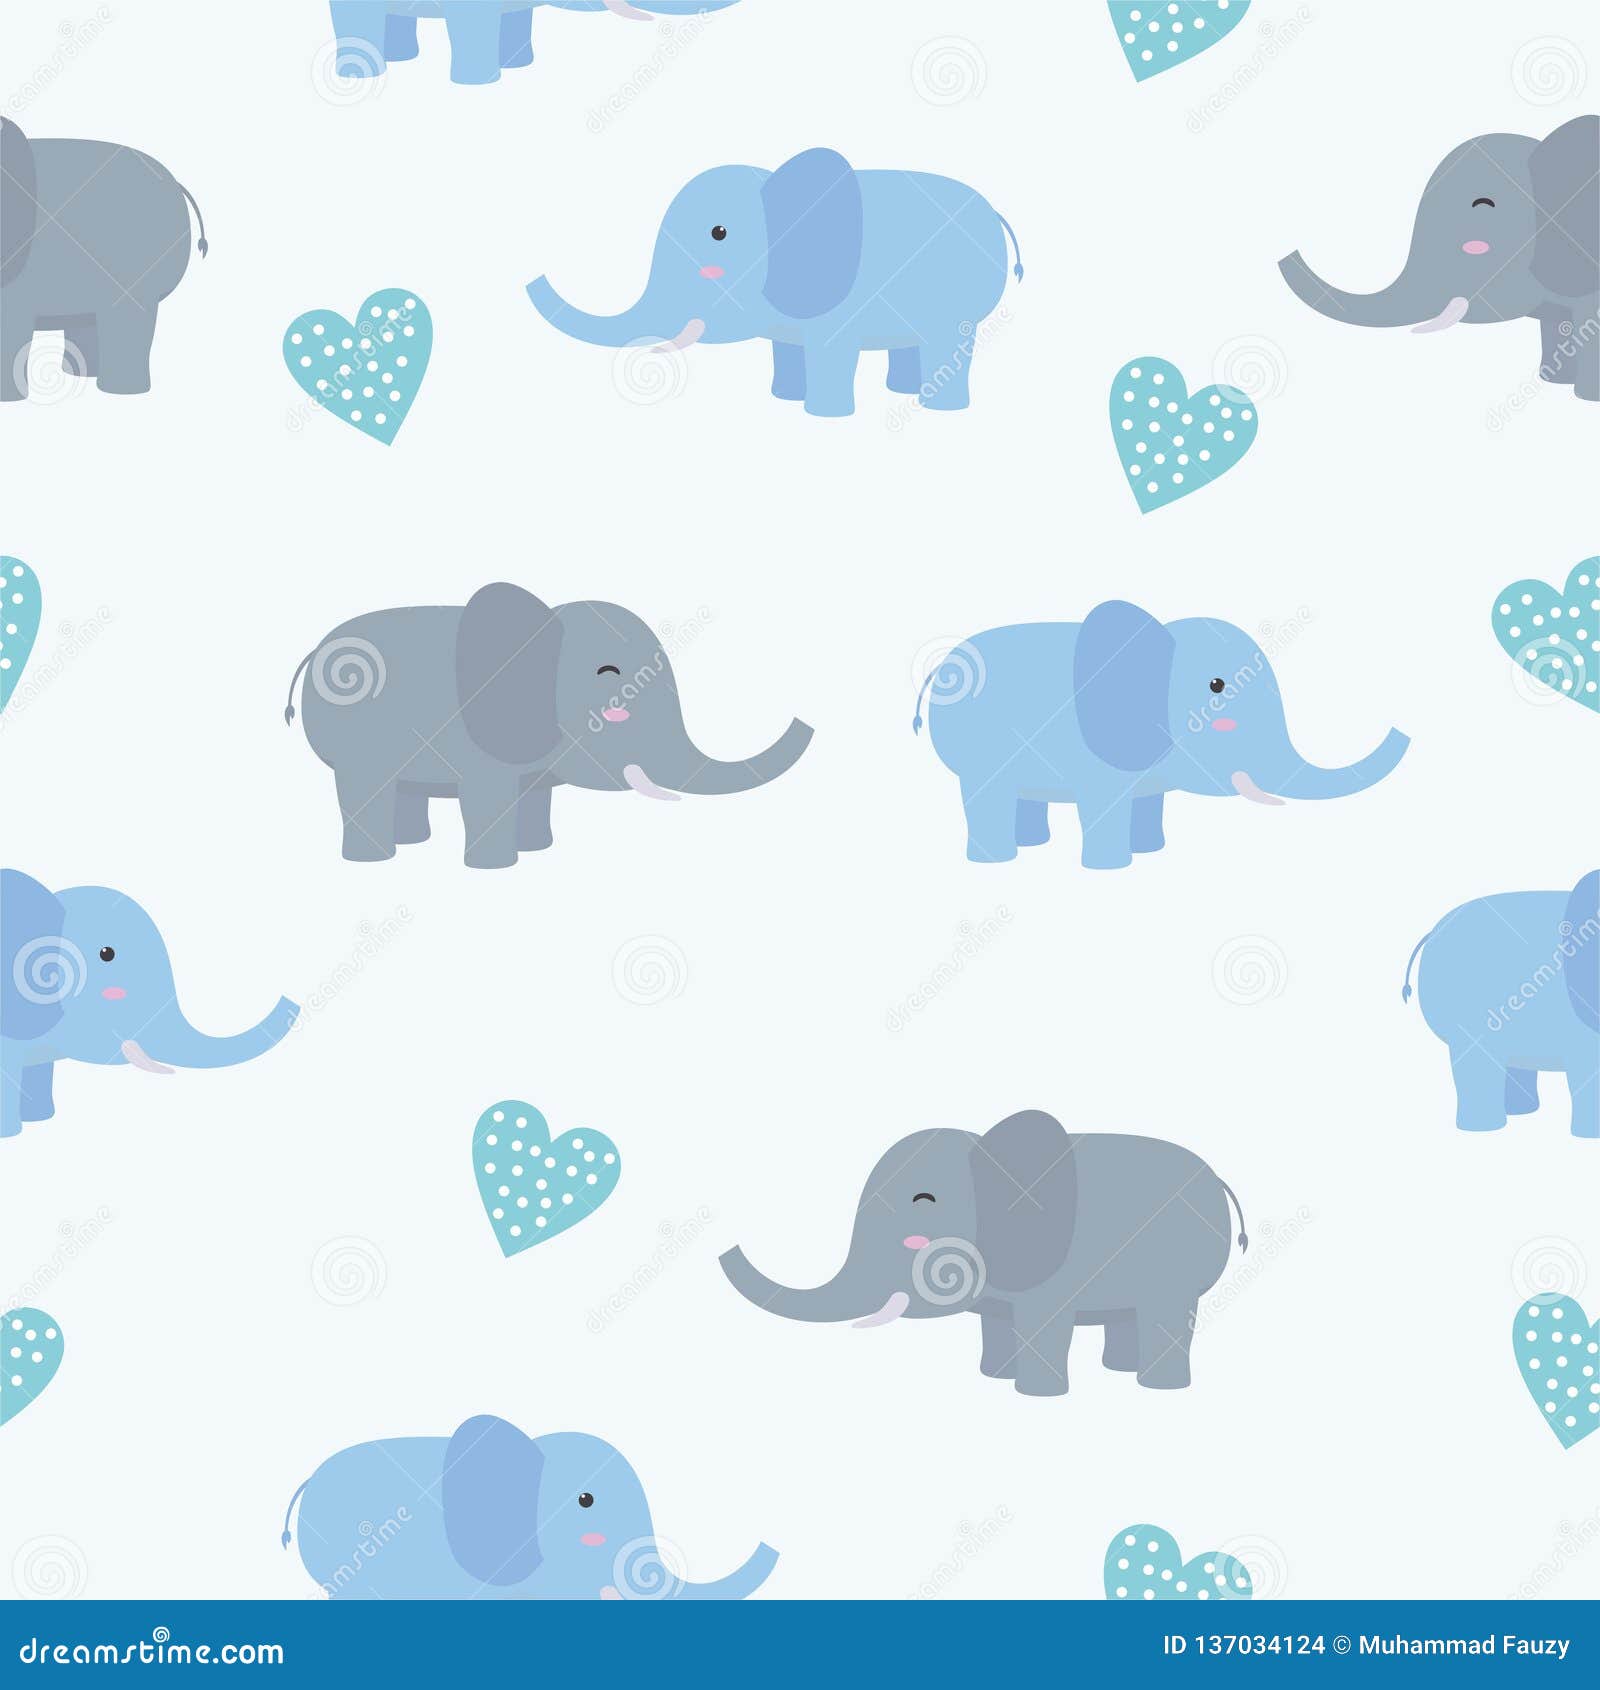 Cute Elephant Seamless Pattern with Blue Color Stock Vector ...